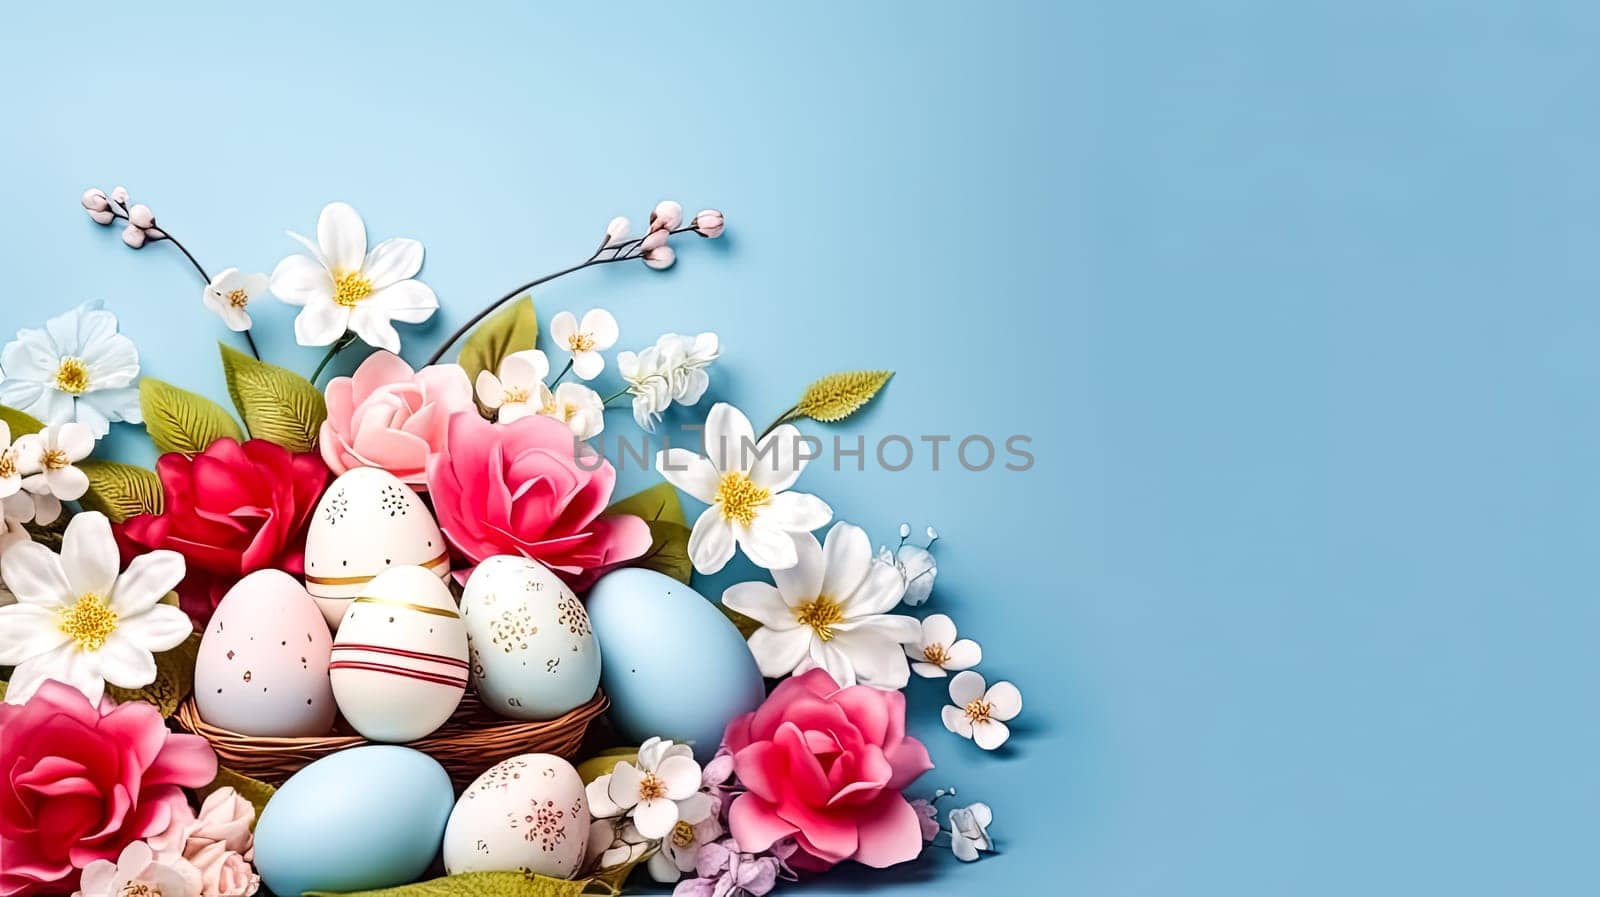 A basket adorned with Easter treasures a festive image evoking the merriment and delight of the spring holiday celebration